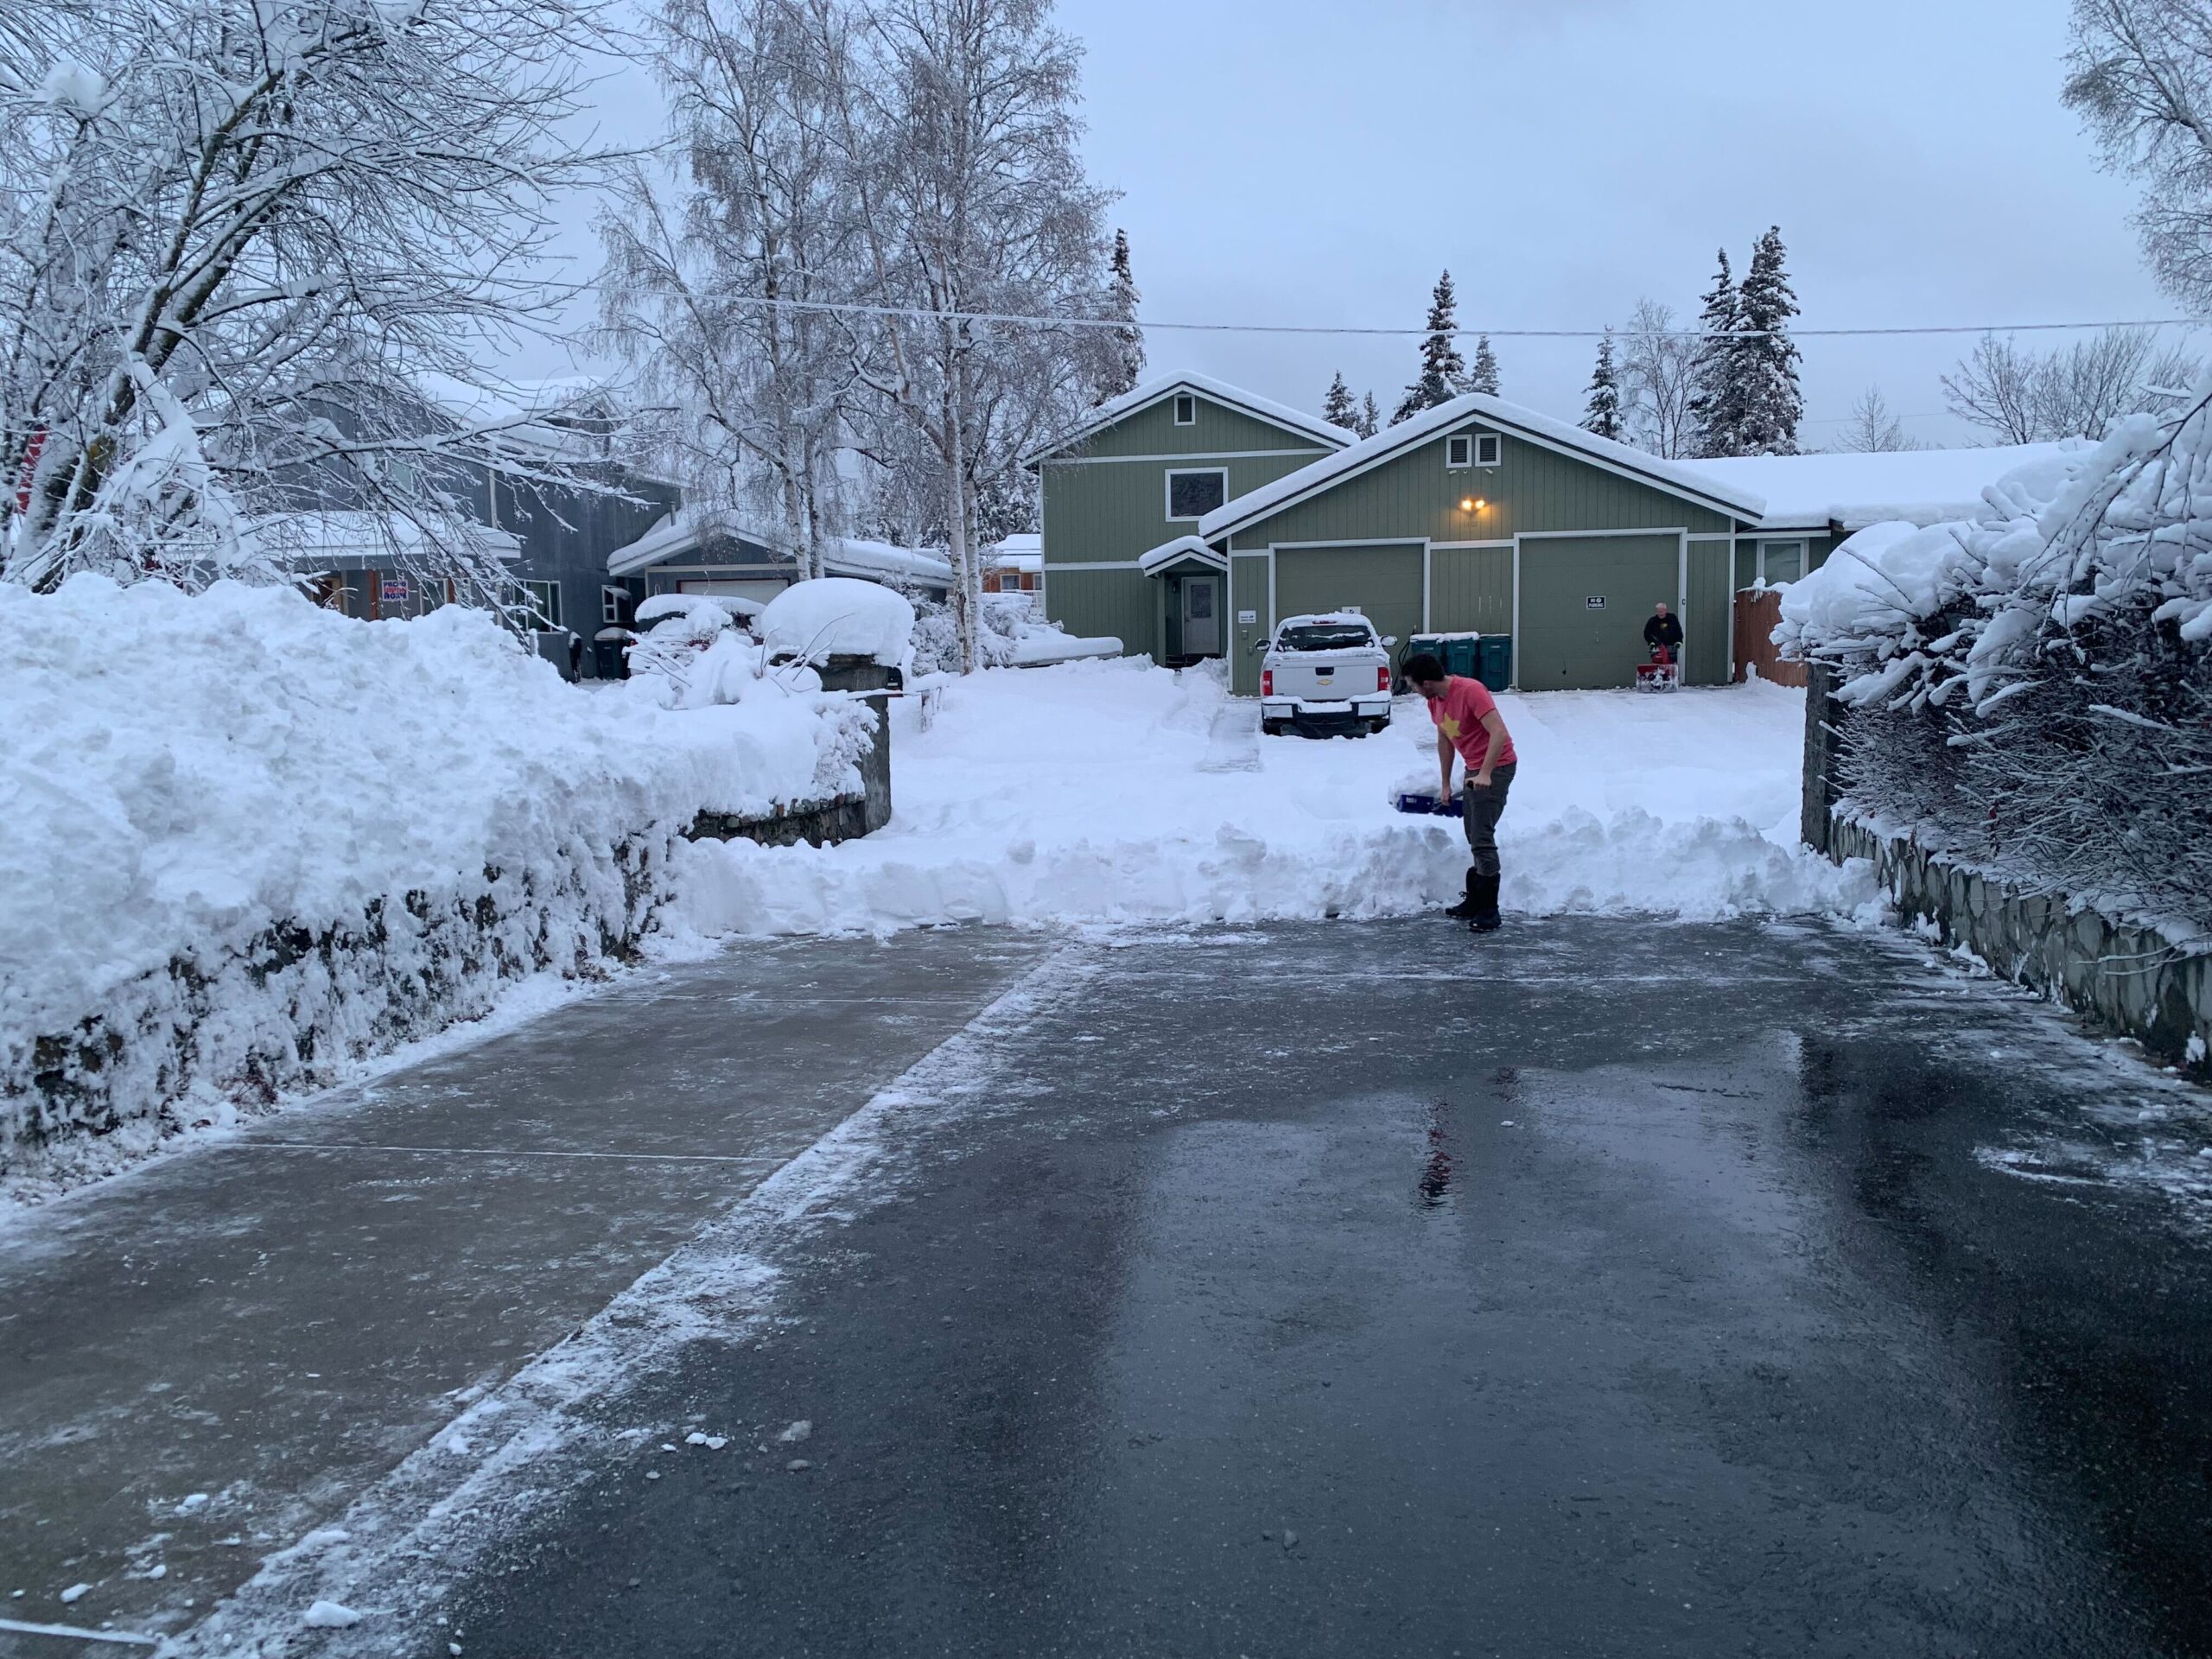 A man shovels snow from his driveway late in the day in front of a green house.